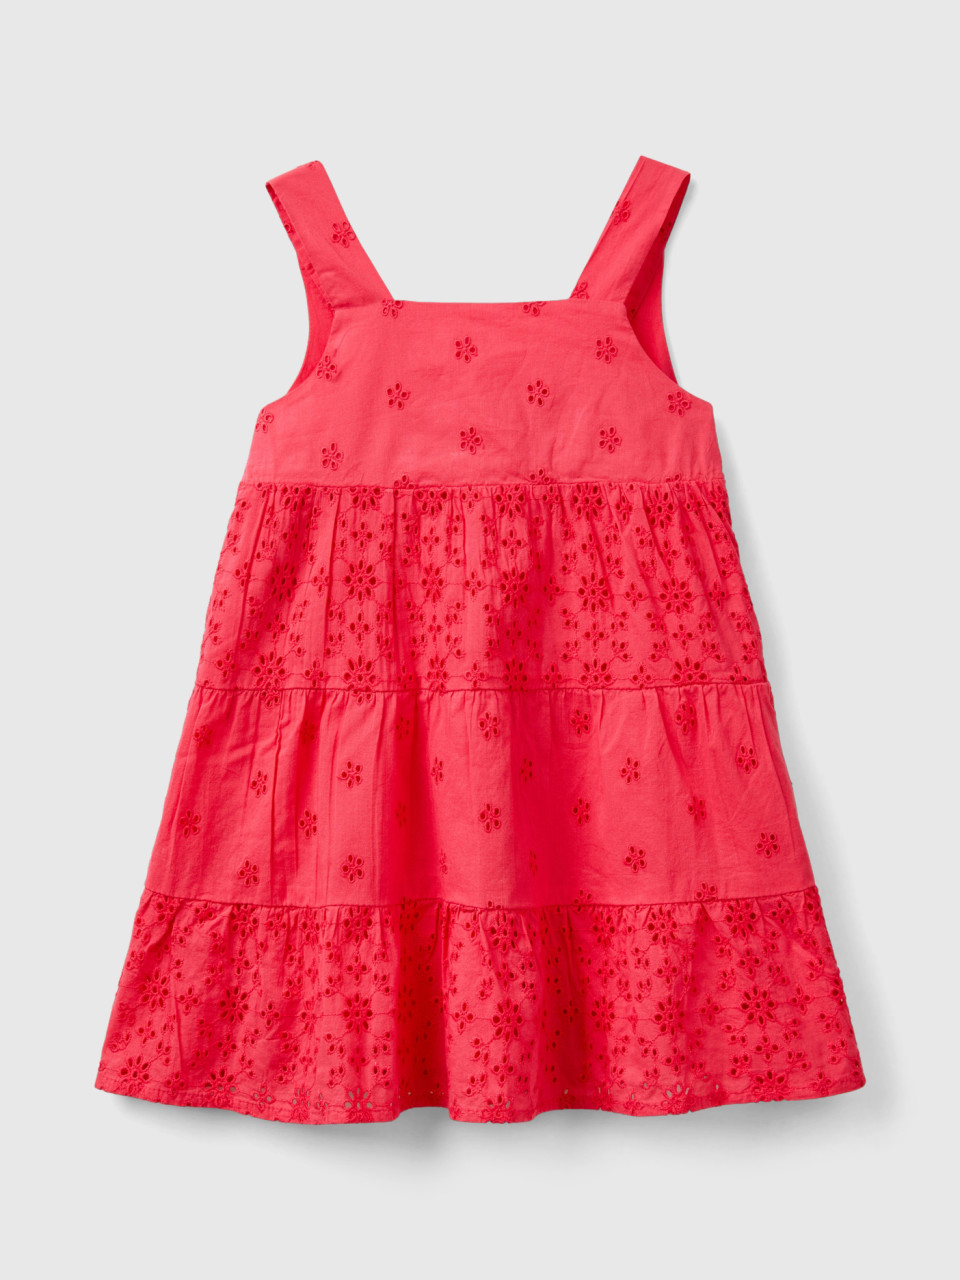 Benetton, Dress With Broderie Anglaise Embroidery, Fuchsia, Kids